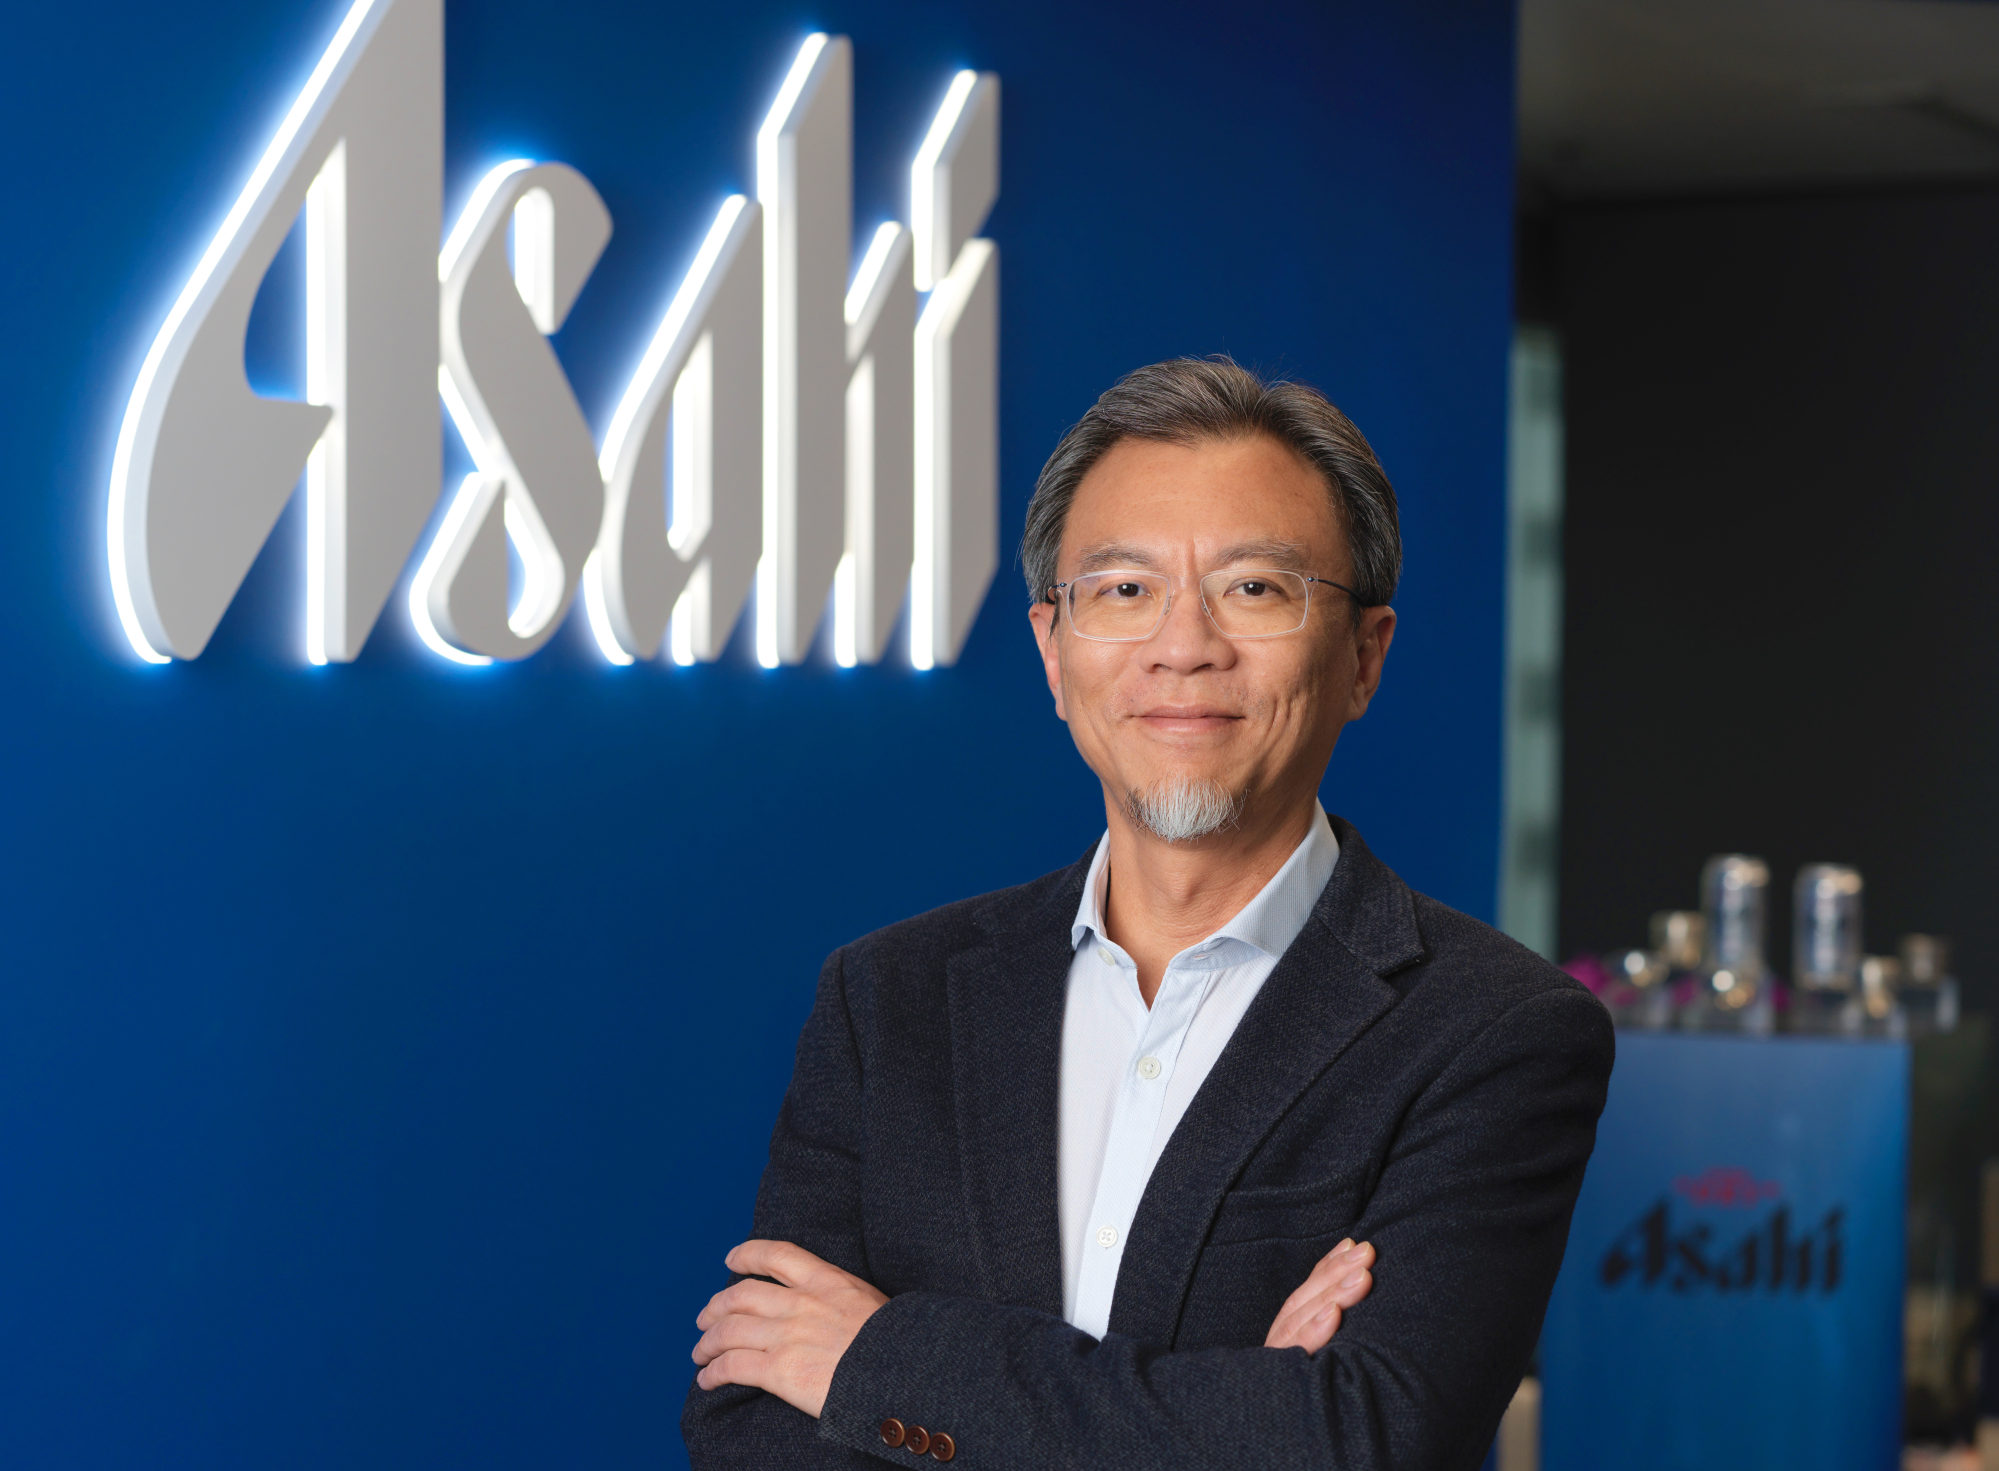 Kinyi Choo, managing director of Asahi Beer Asia, says wants to grow the brand from a regional Japanese brand to a global icon. Photo: Handout